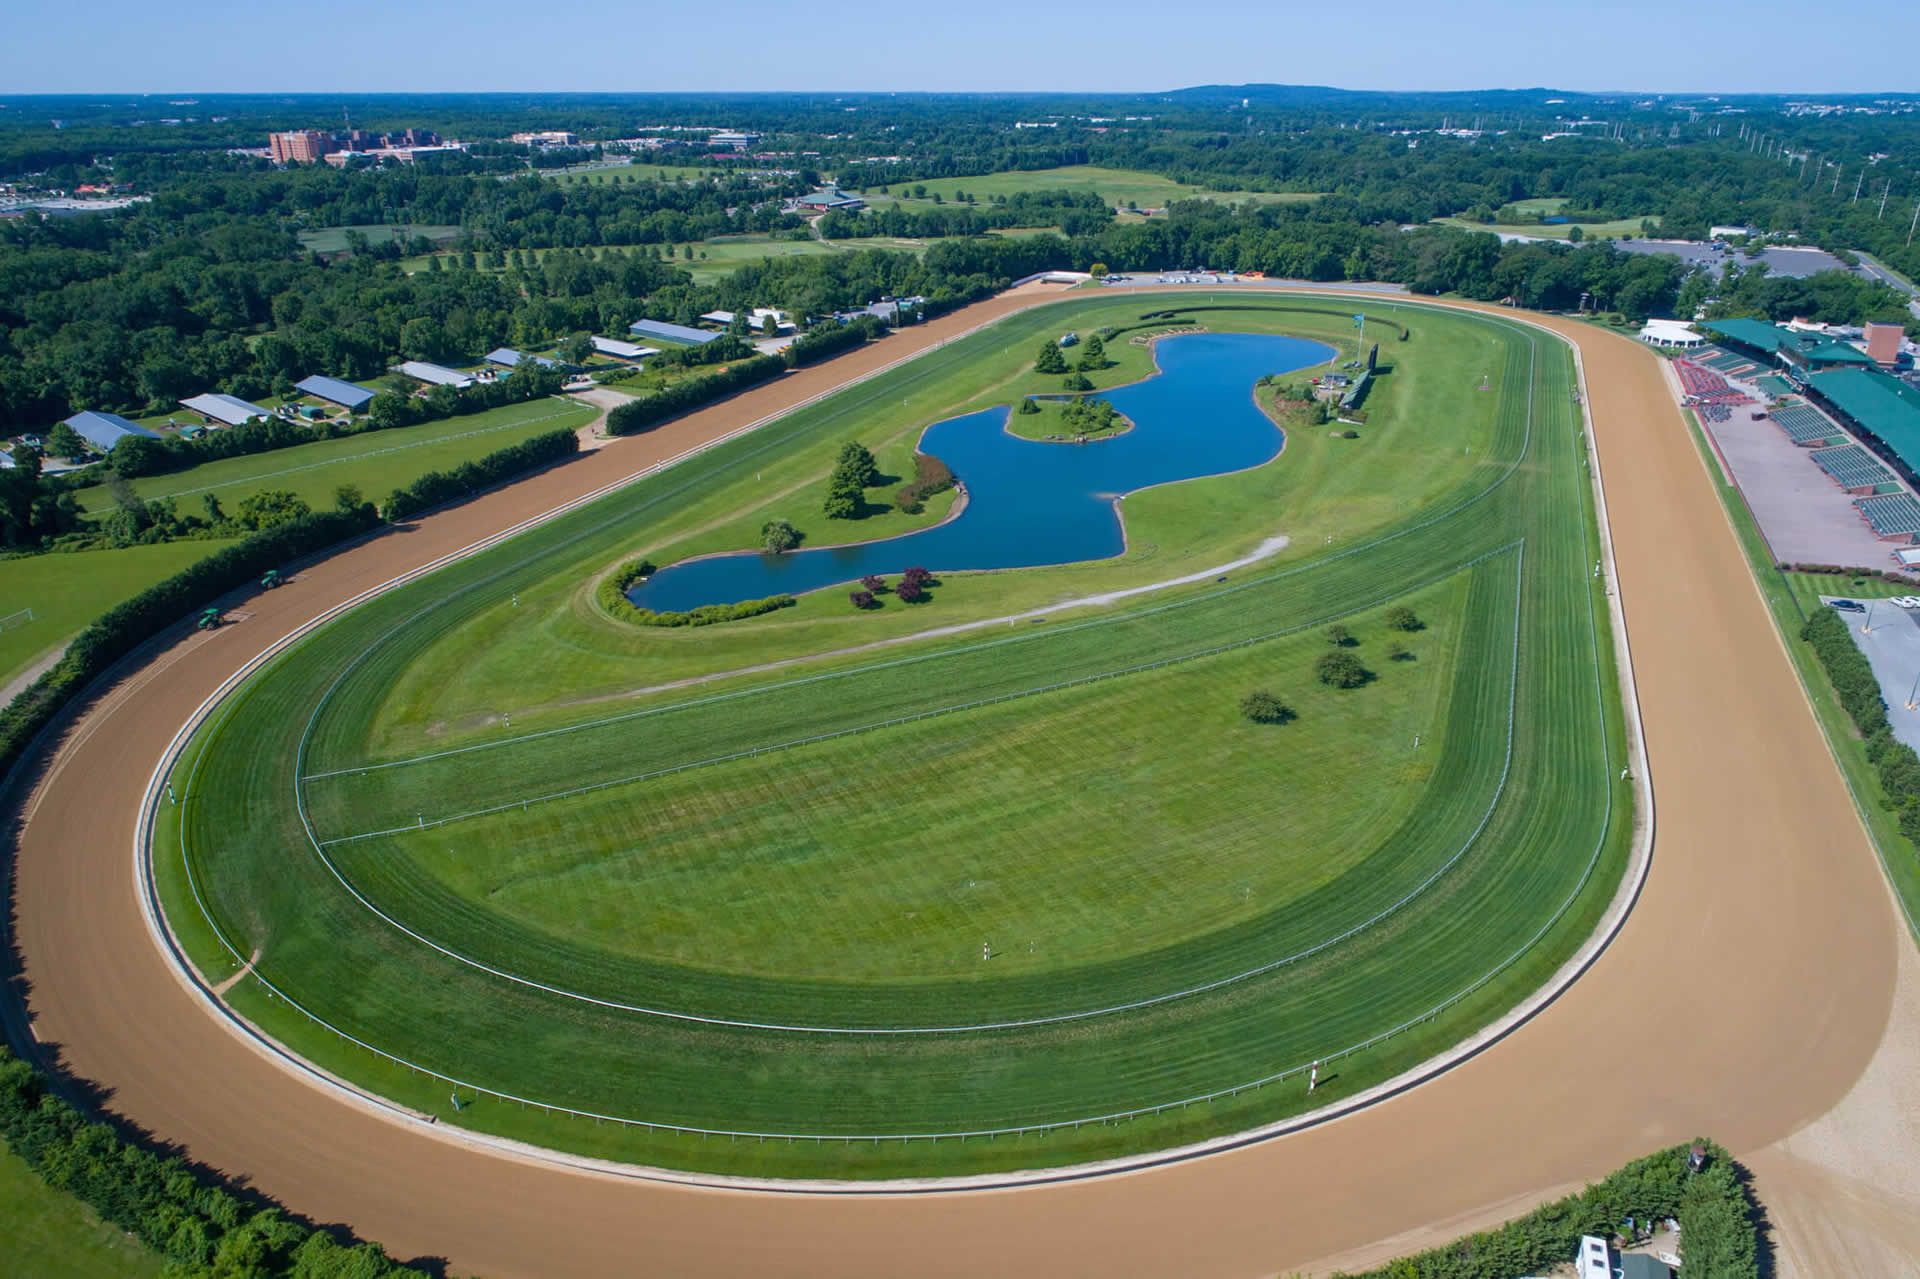 Aerial Image of the Delaware Park